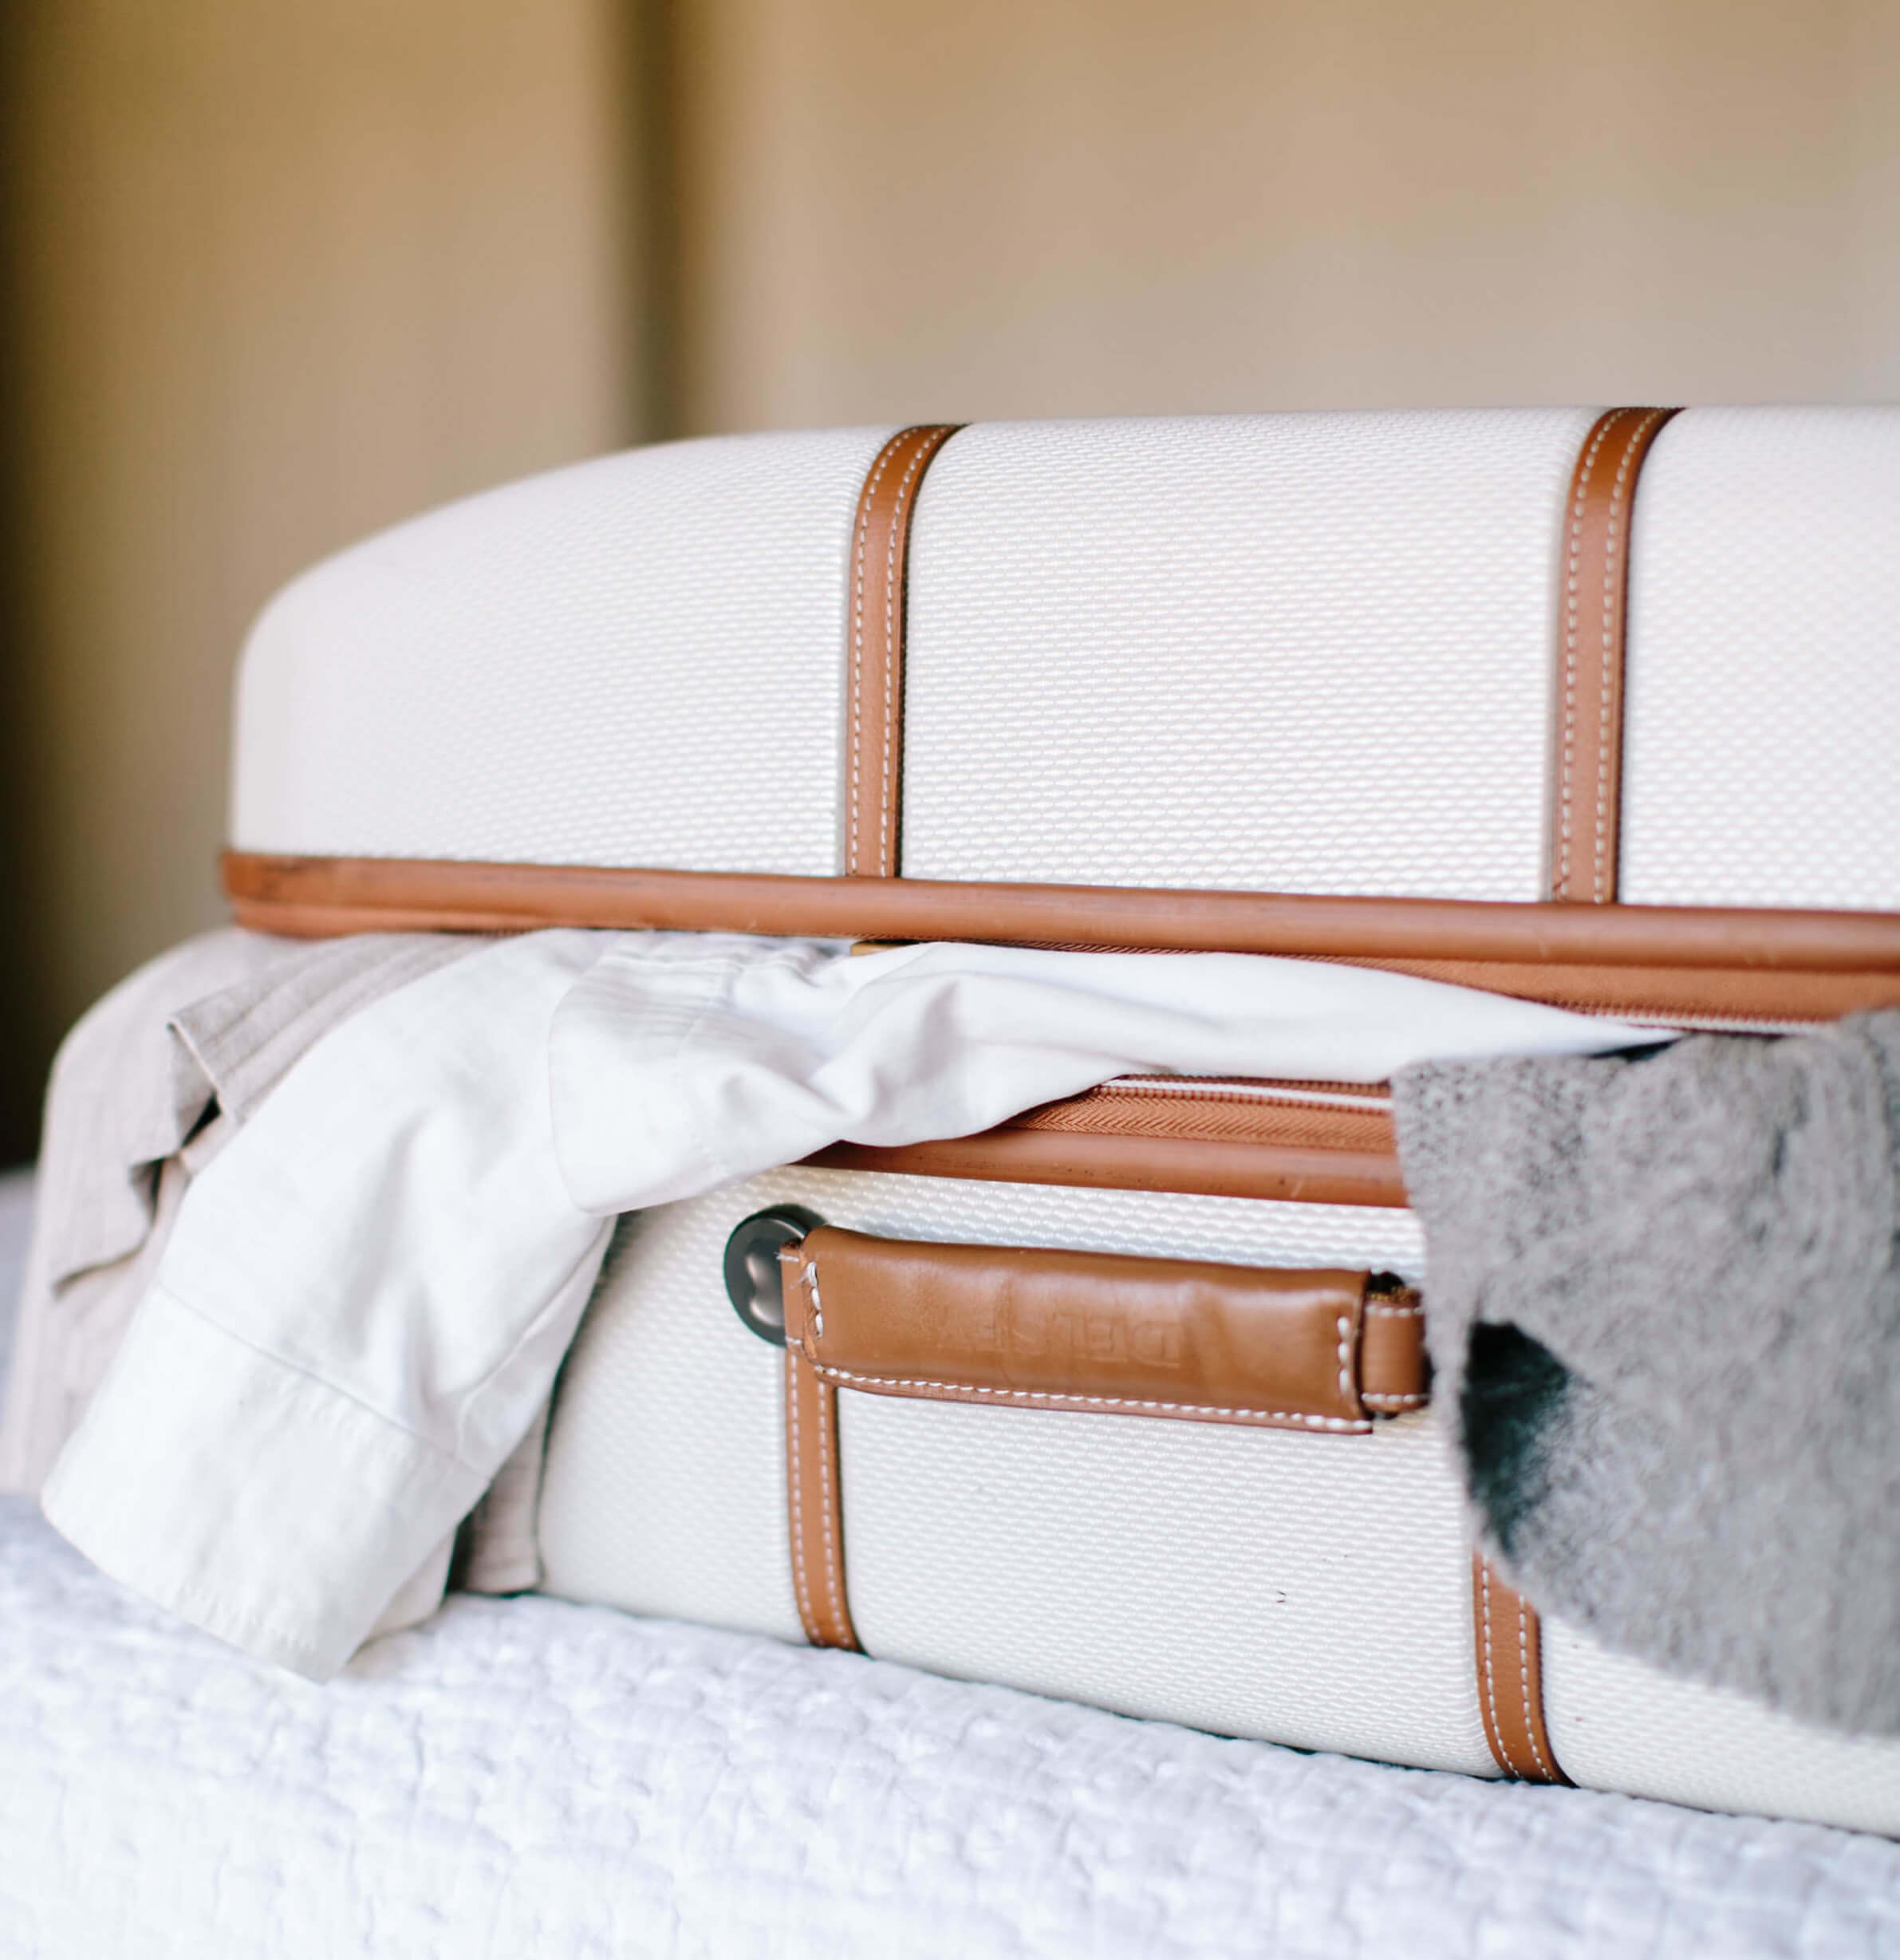 The Best 10 Travel Packing Tips To Ease Anxiety